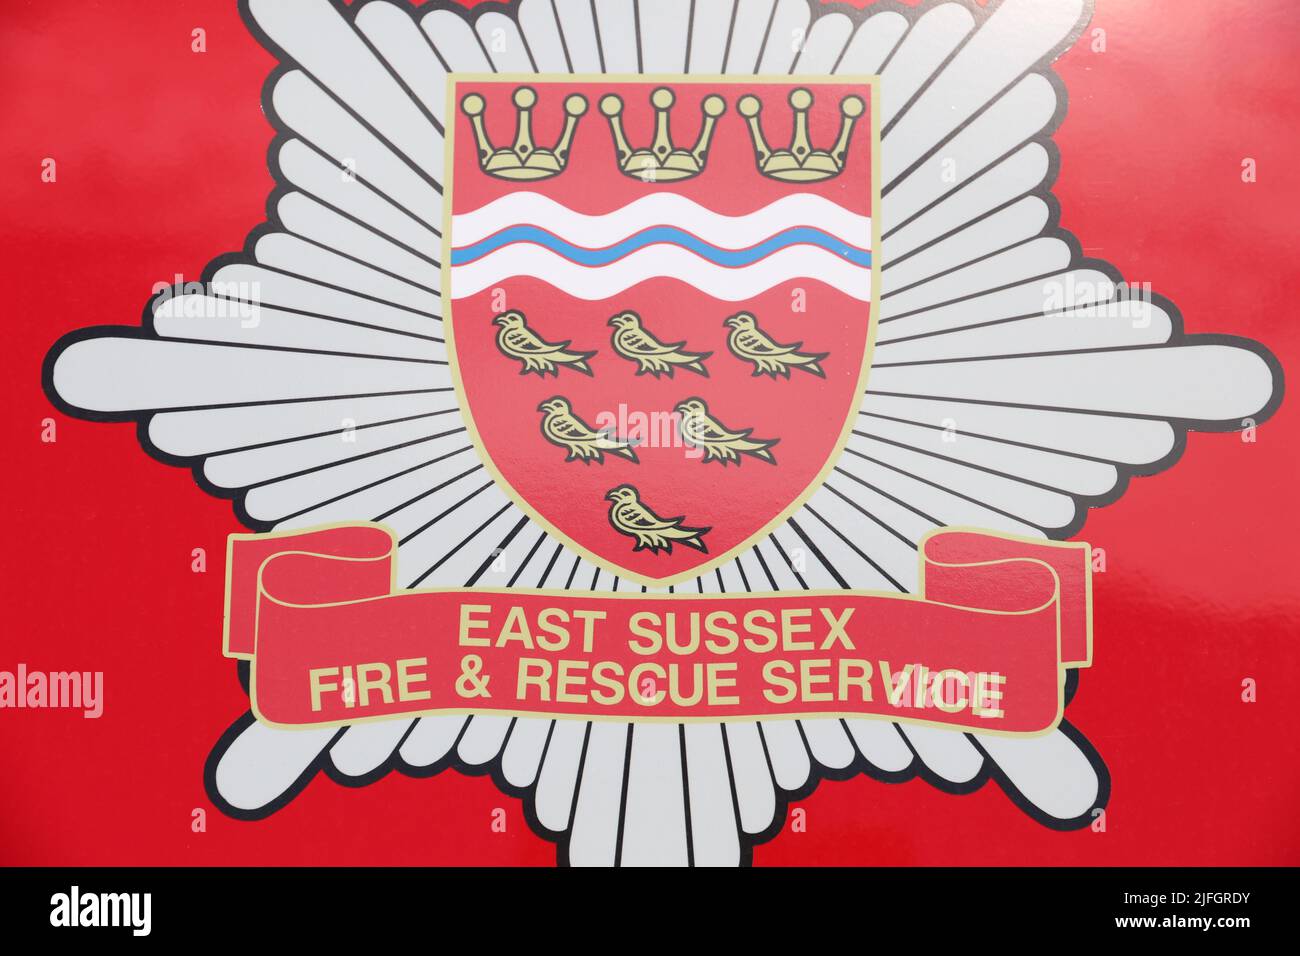 EAST SUSSEX FIRE & RESCUE SERVICE BADGE LOGO LETTERING Stock Photo